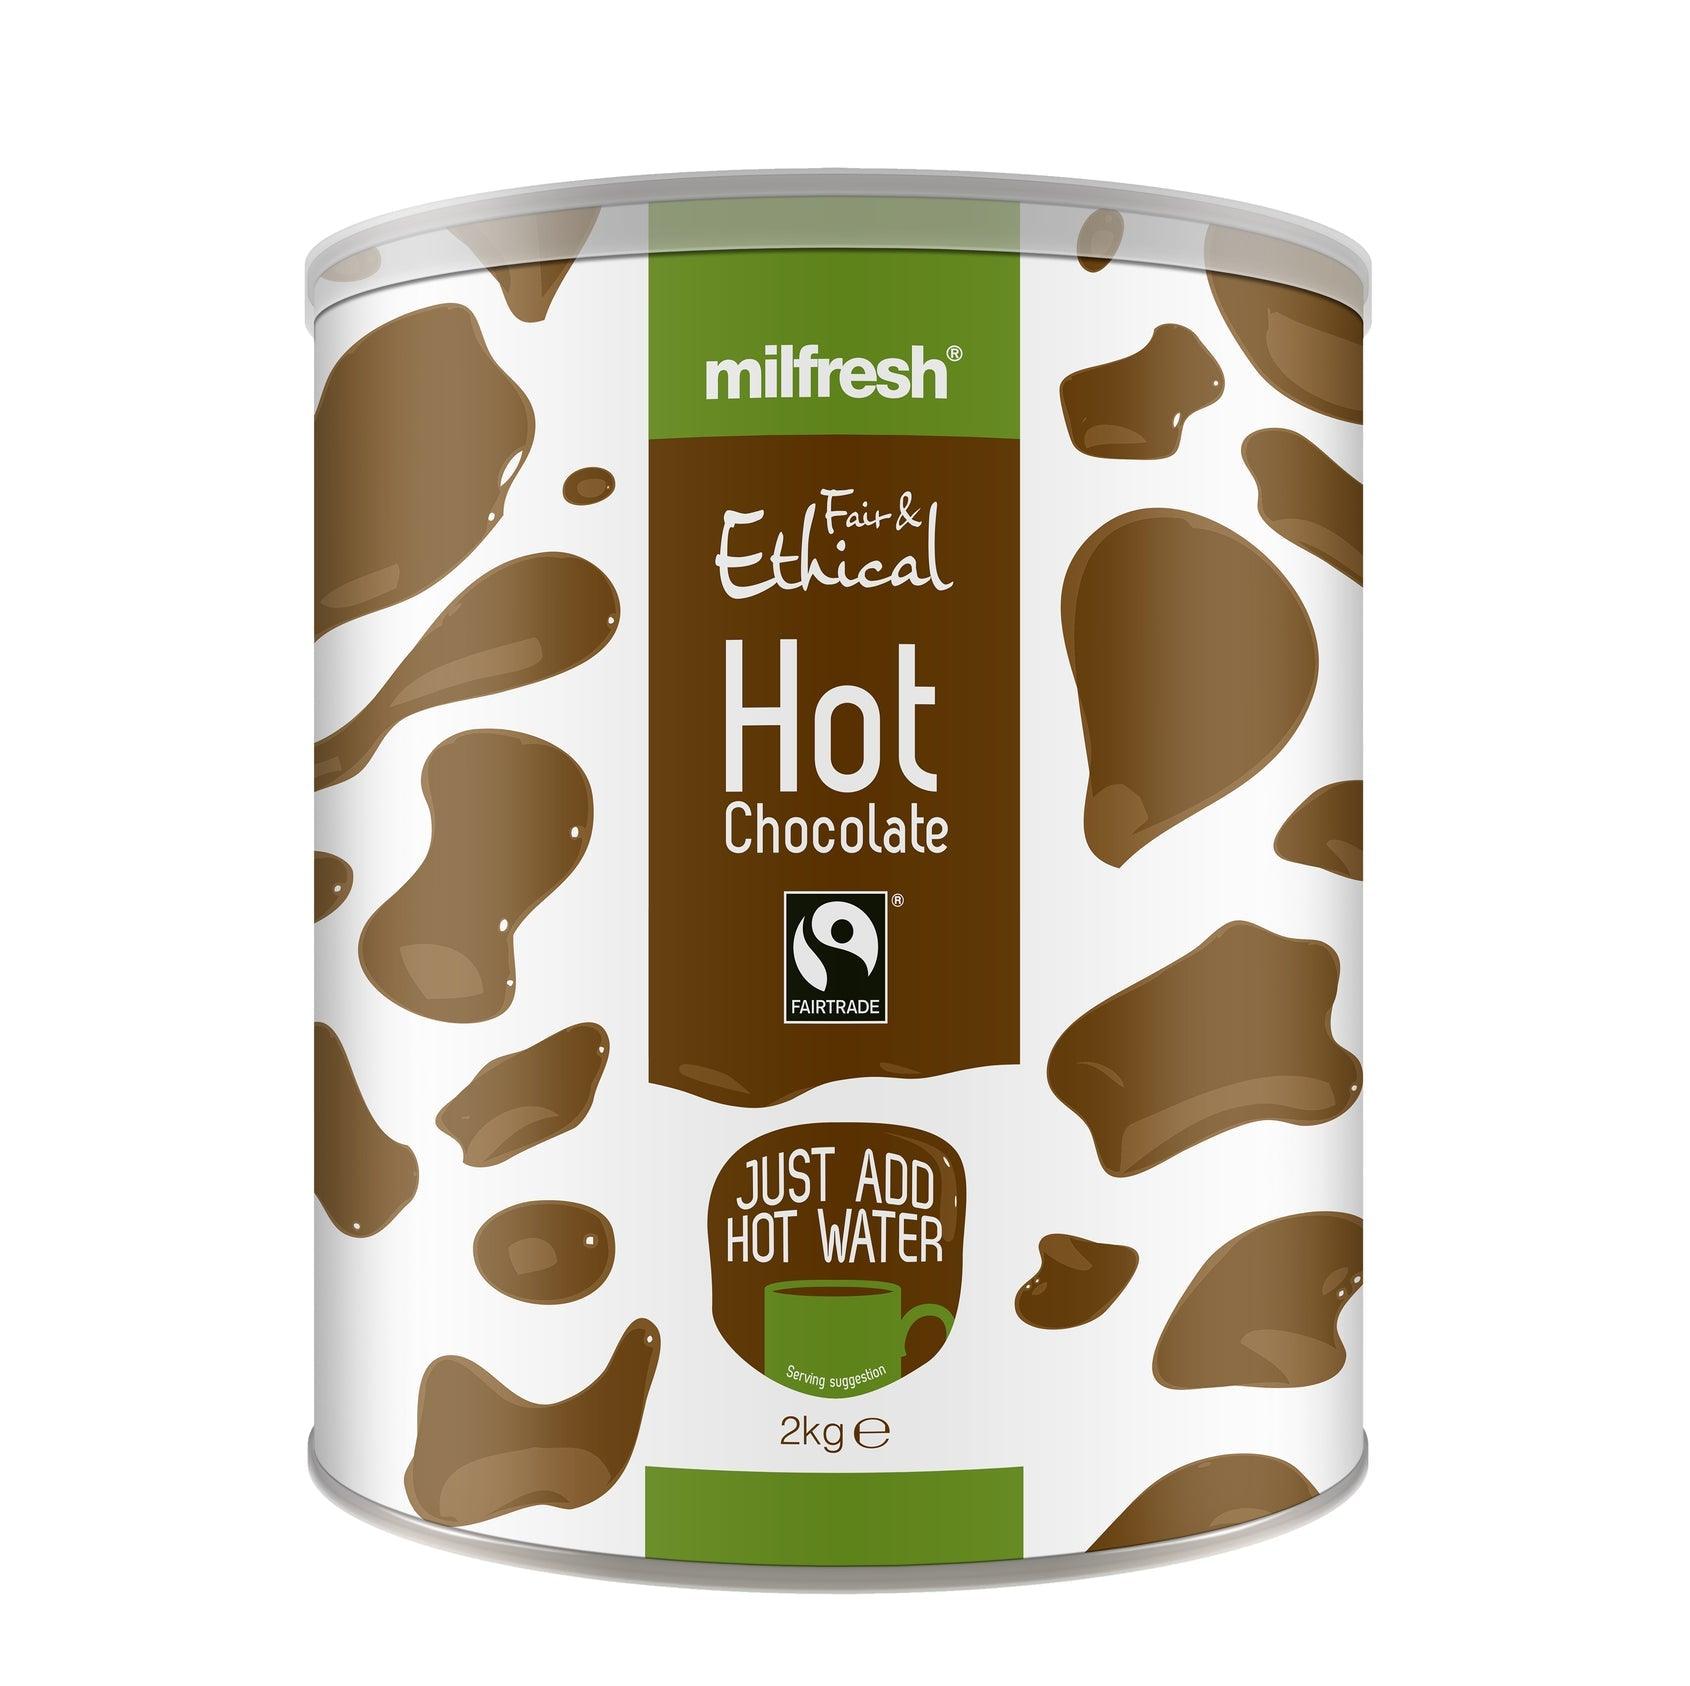 Milfresh Fair & Ethical Instant Hot Chocolate 2kg Tin (Add Hot Water) - Vending Superstore